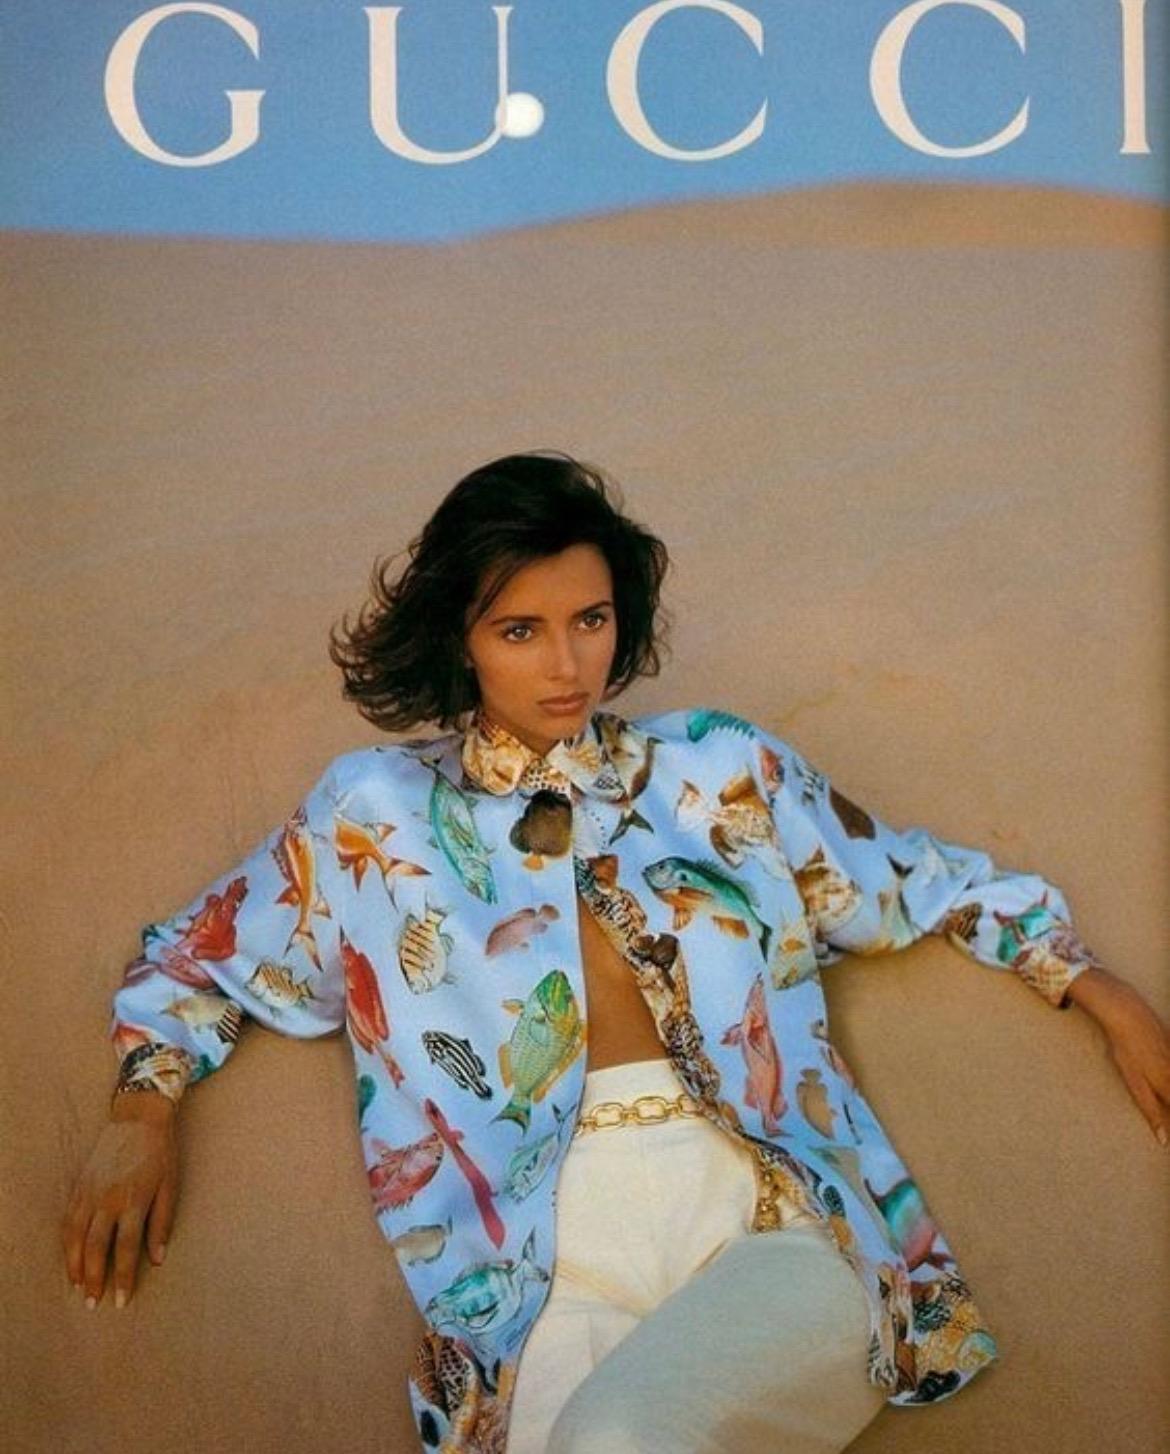 Presenting a baby blue aquatic motif silk button-down Gucci shirt. From the Spring/Summer 1992 collection, this fabulous top appeared on the season's runway and in the season's ad campaign. Covered in shells and different aquatic life, this fabulous